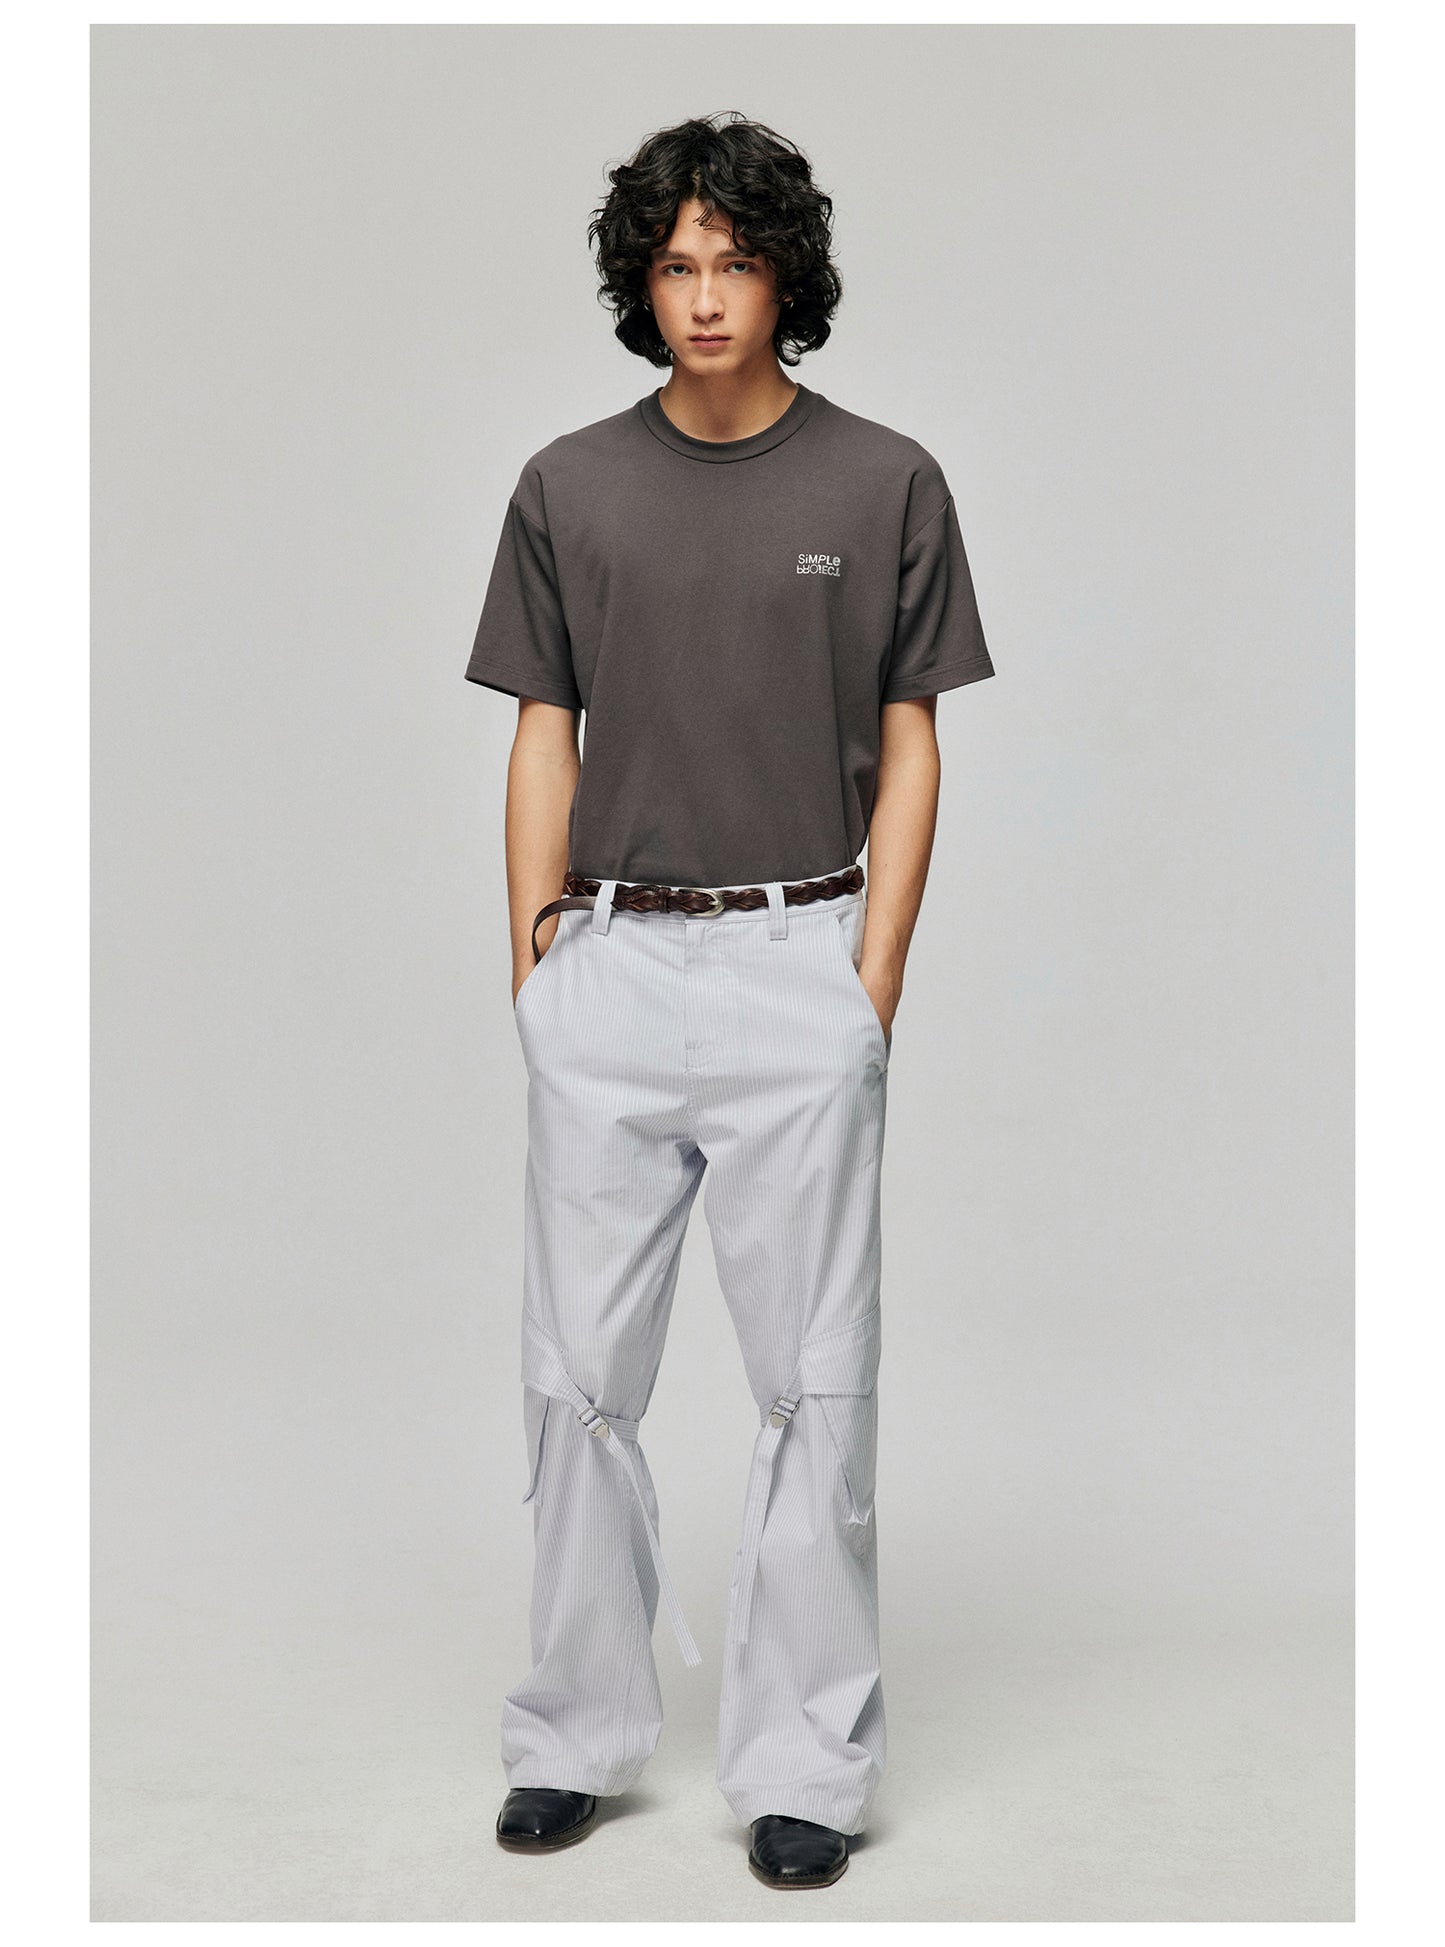 Adjustable strap casual pants